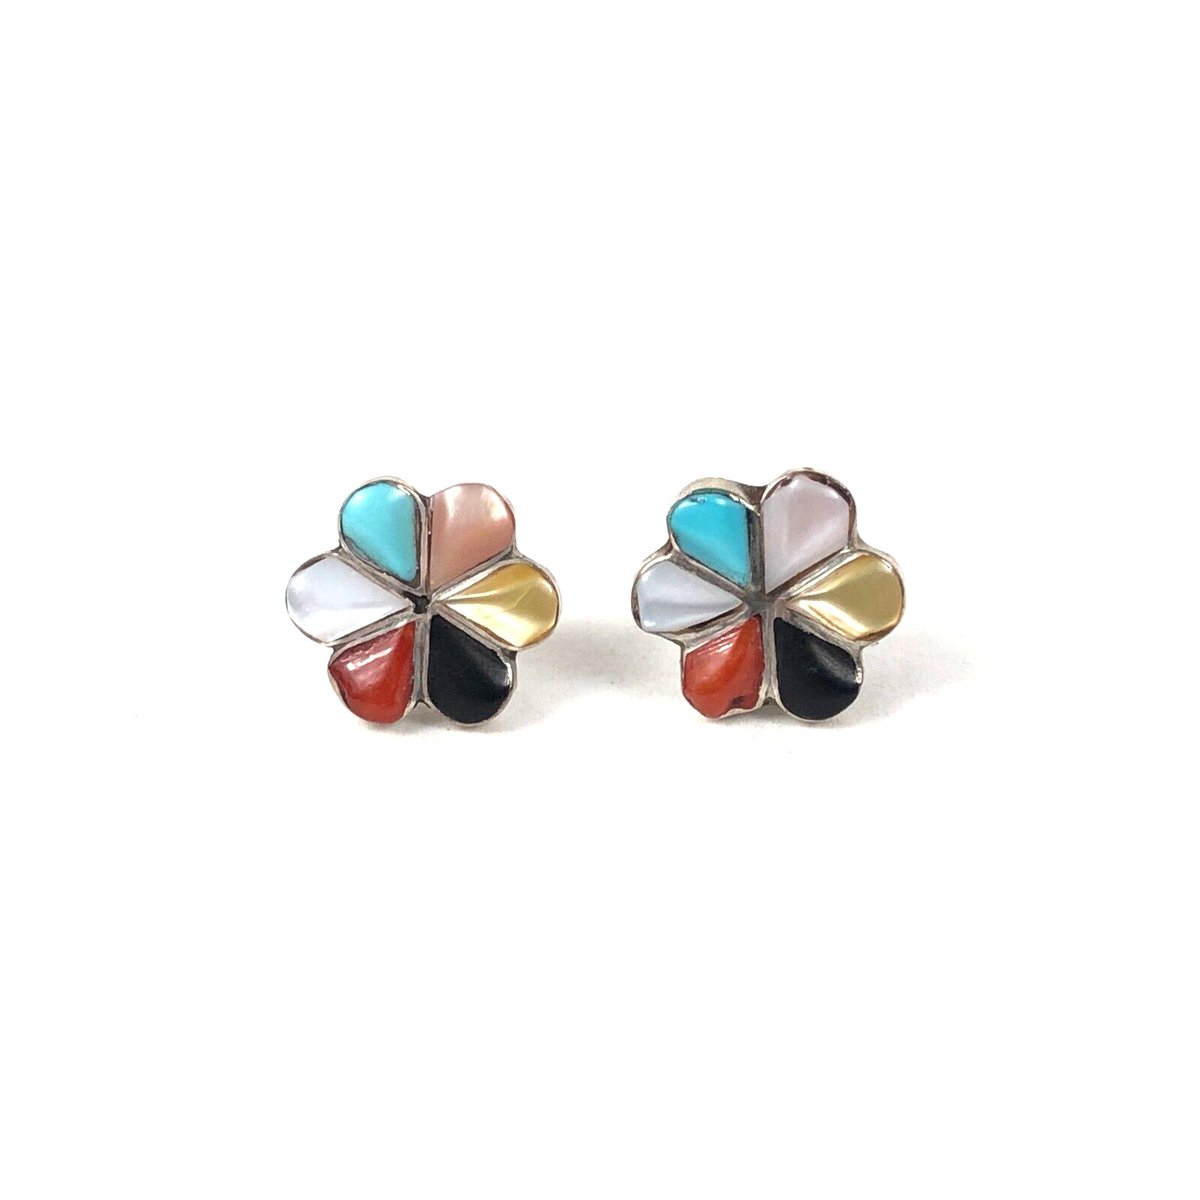 Check out Southwestern Petite Stud Earrings Sterling Coral Turquoise MOP Pre-Owned Jewelry ebay.com/itm/2660676351…

#southwestern #southwesternjewelry #studearrings #sterling #sterlingearrings #preownedjewelry #estatejewelry #roguesestatejewelry